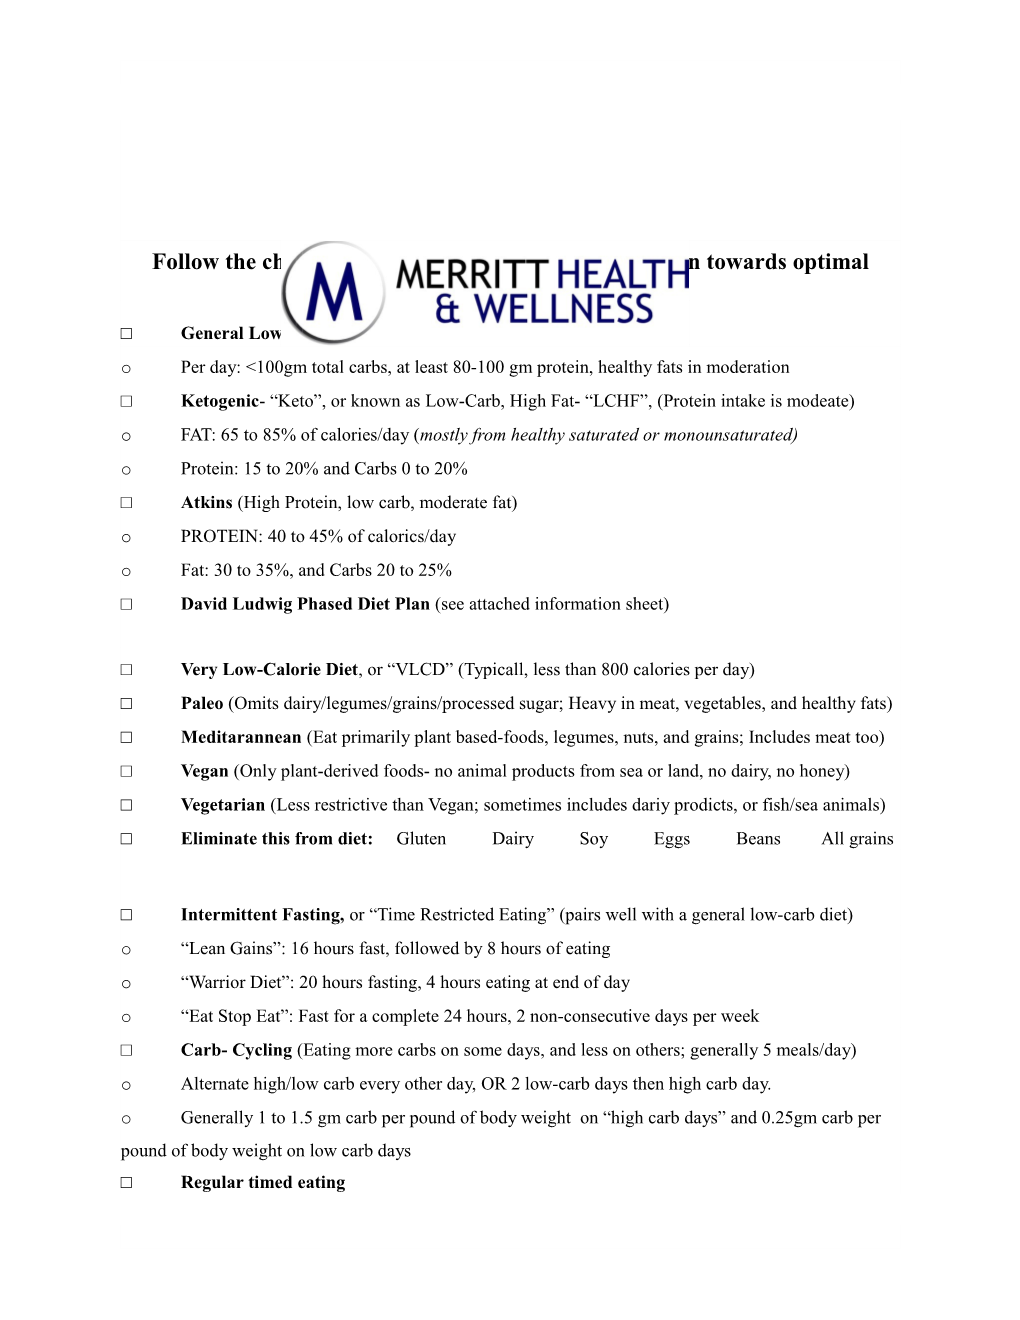 Follow the Checked Boxes Below to Guide Your Nutrition Towards Optimal Health and Wellness